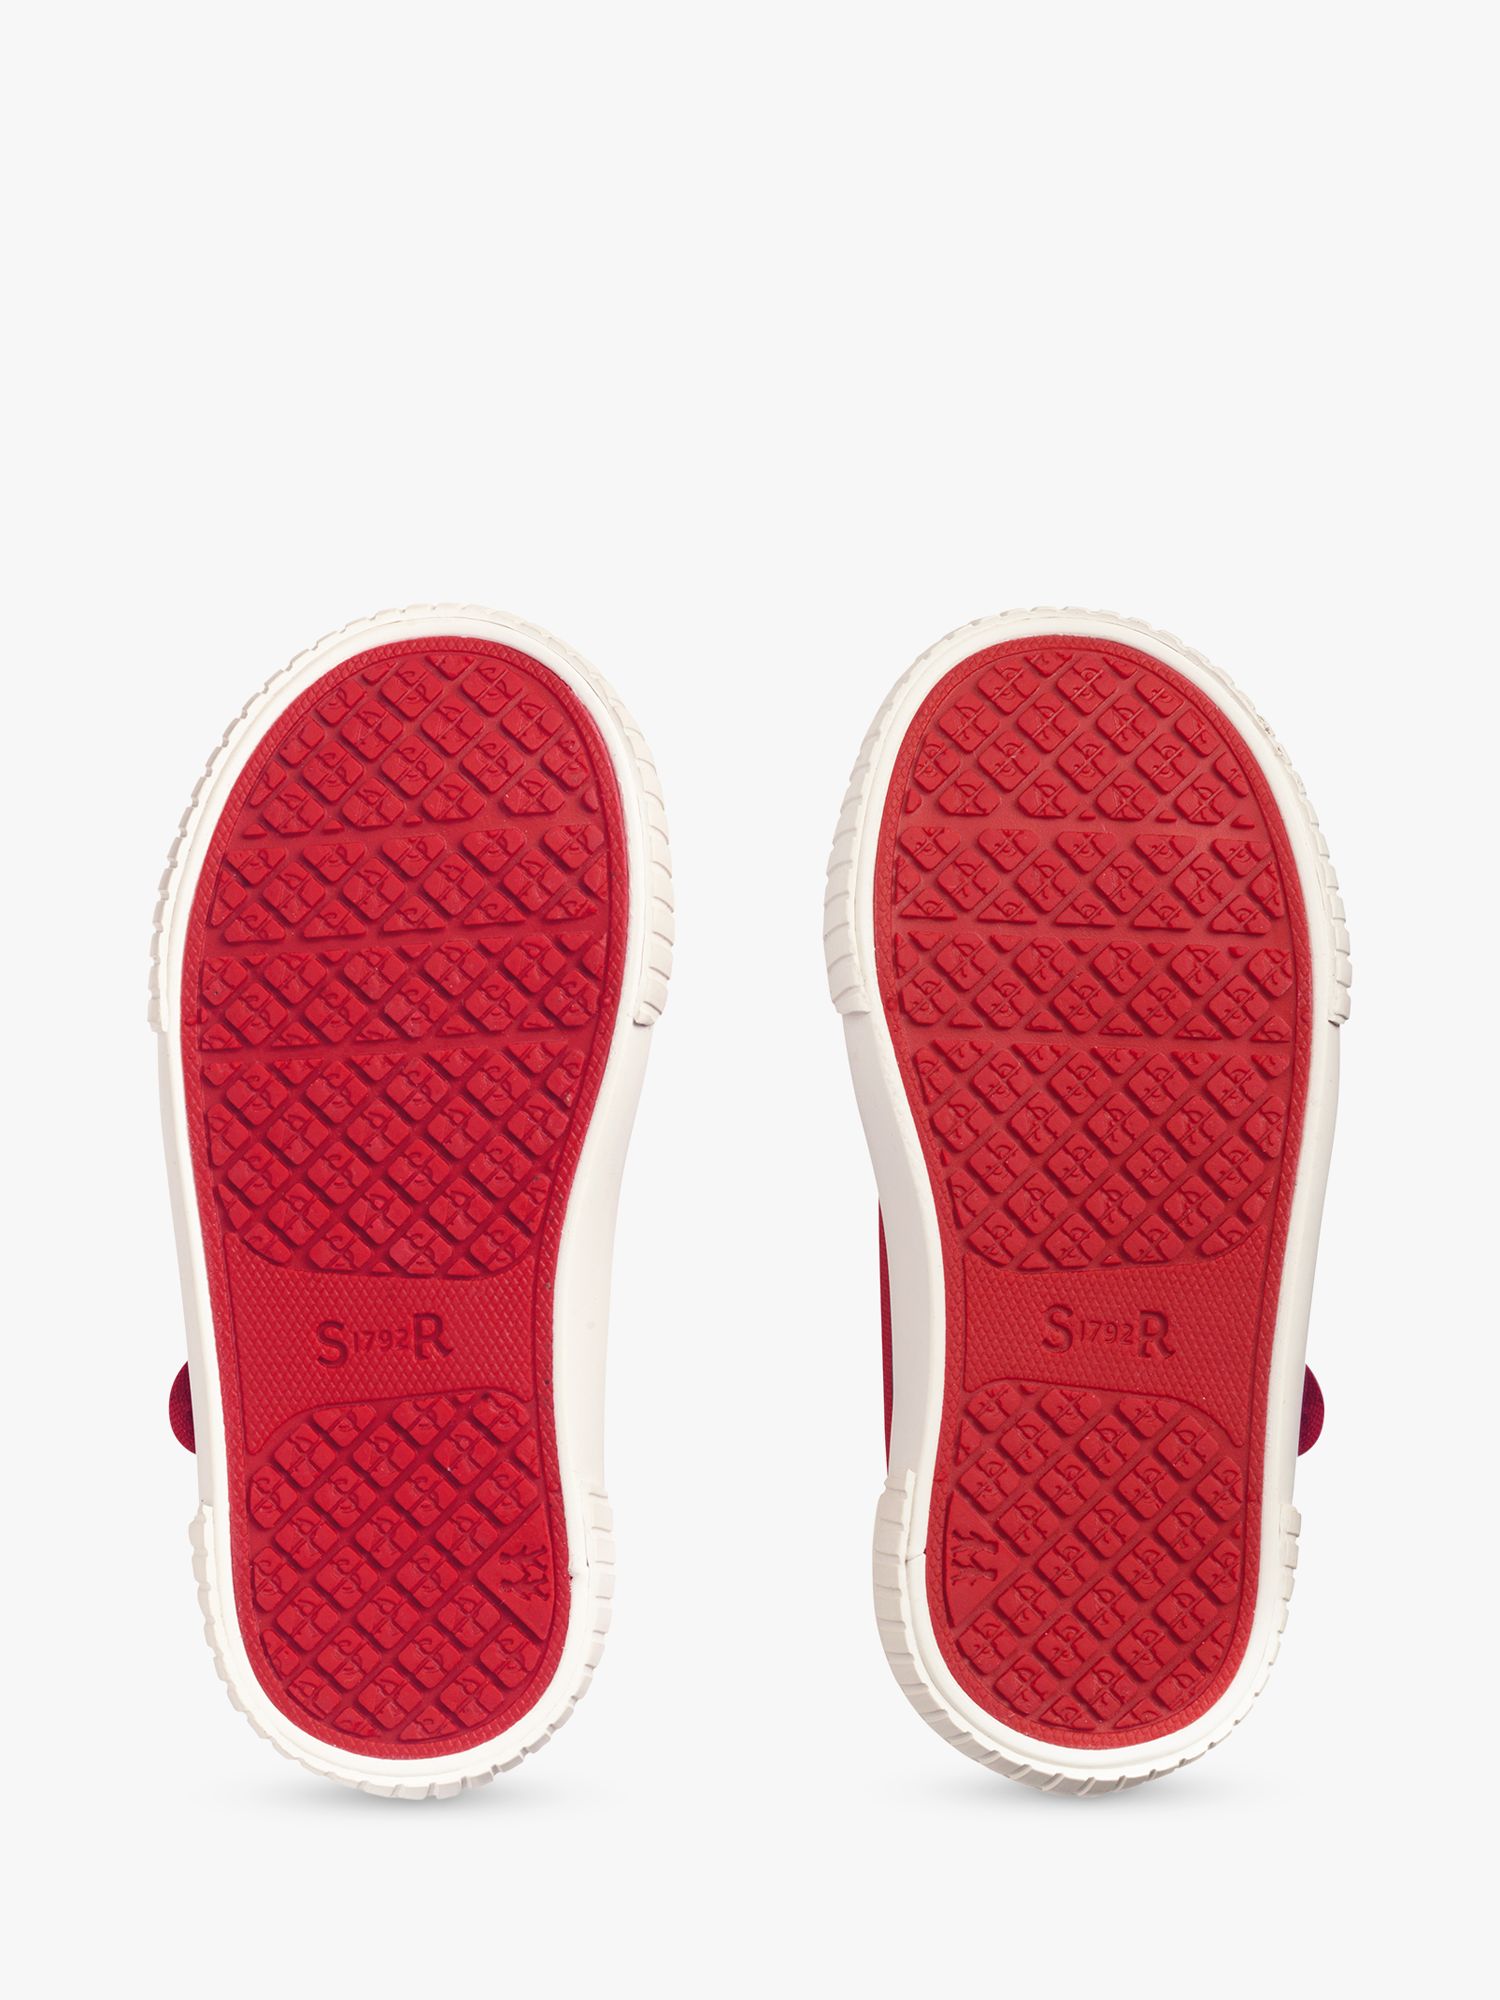 Start-Rite’s Kids' Anchor Canvas Shoes, Red, 6F Jnr